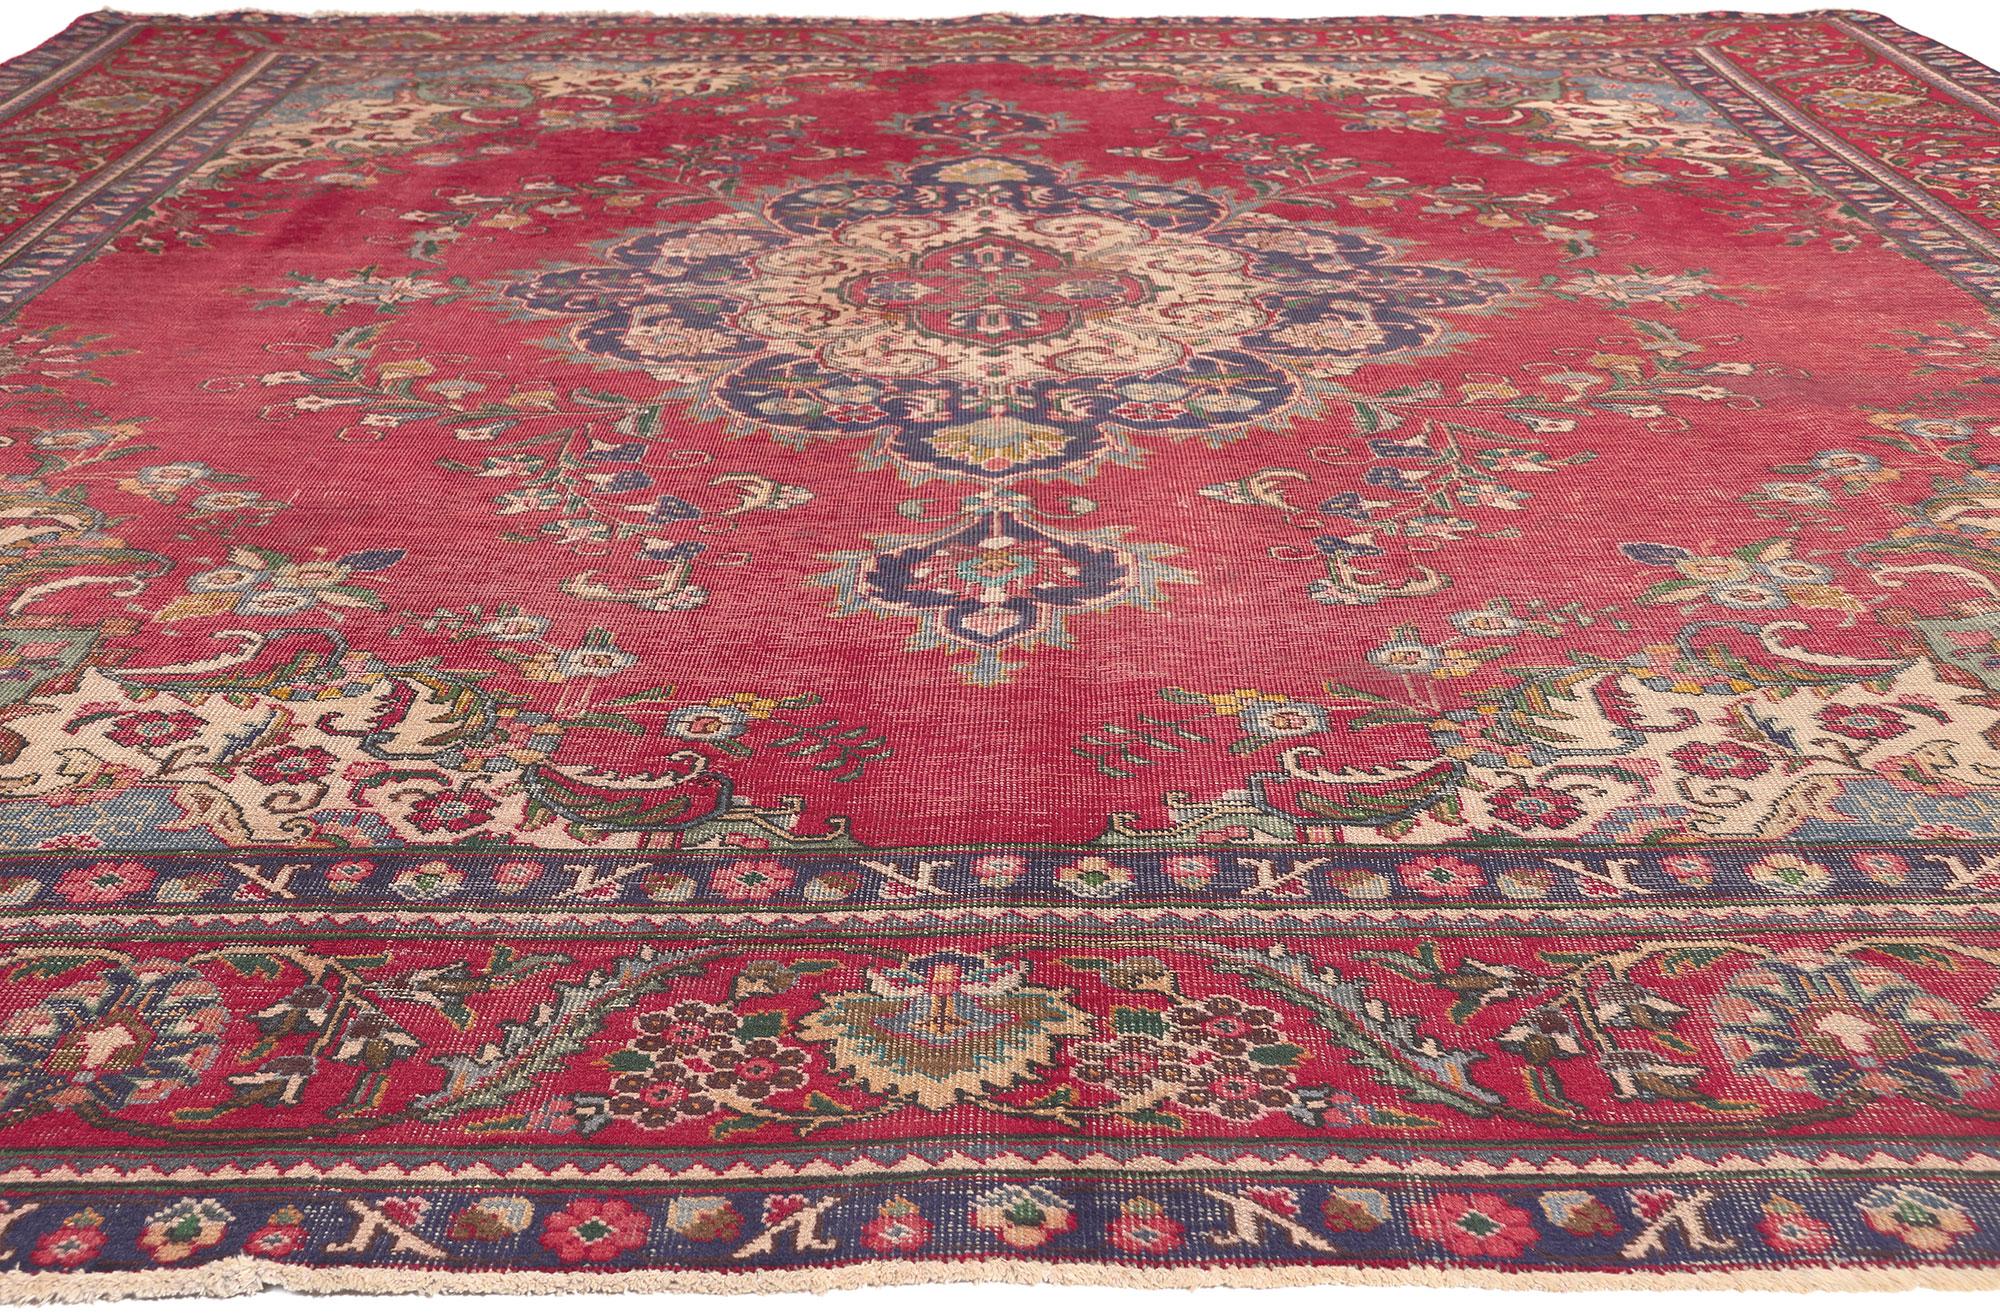 Hand-Knotted Antique-Worn Persian Tabriz Rug, Rustic Sensibility Meets Nostalgic Charm For Sale